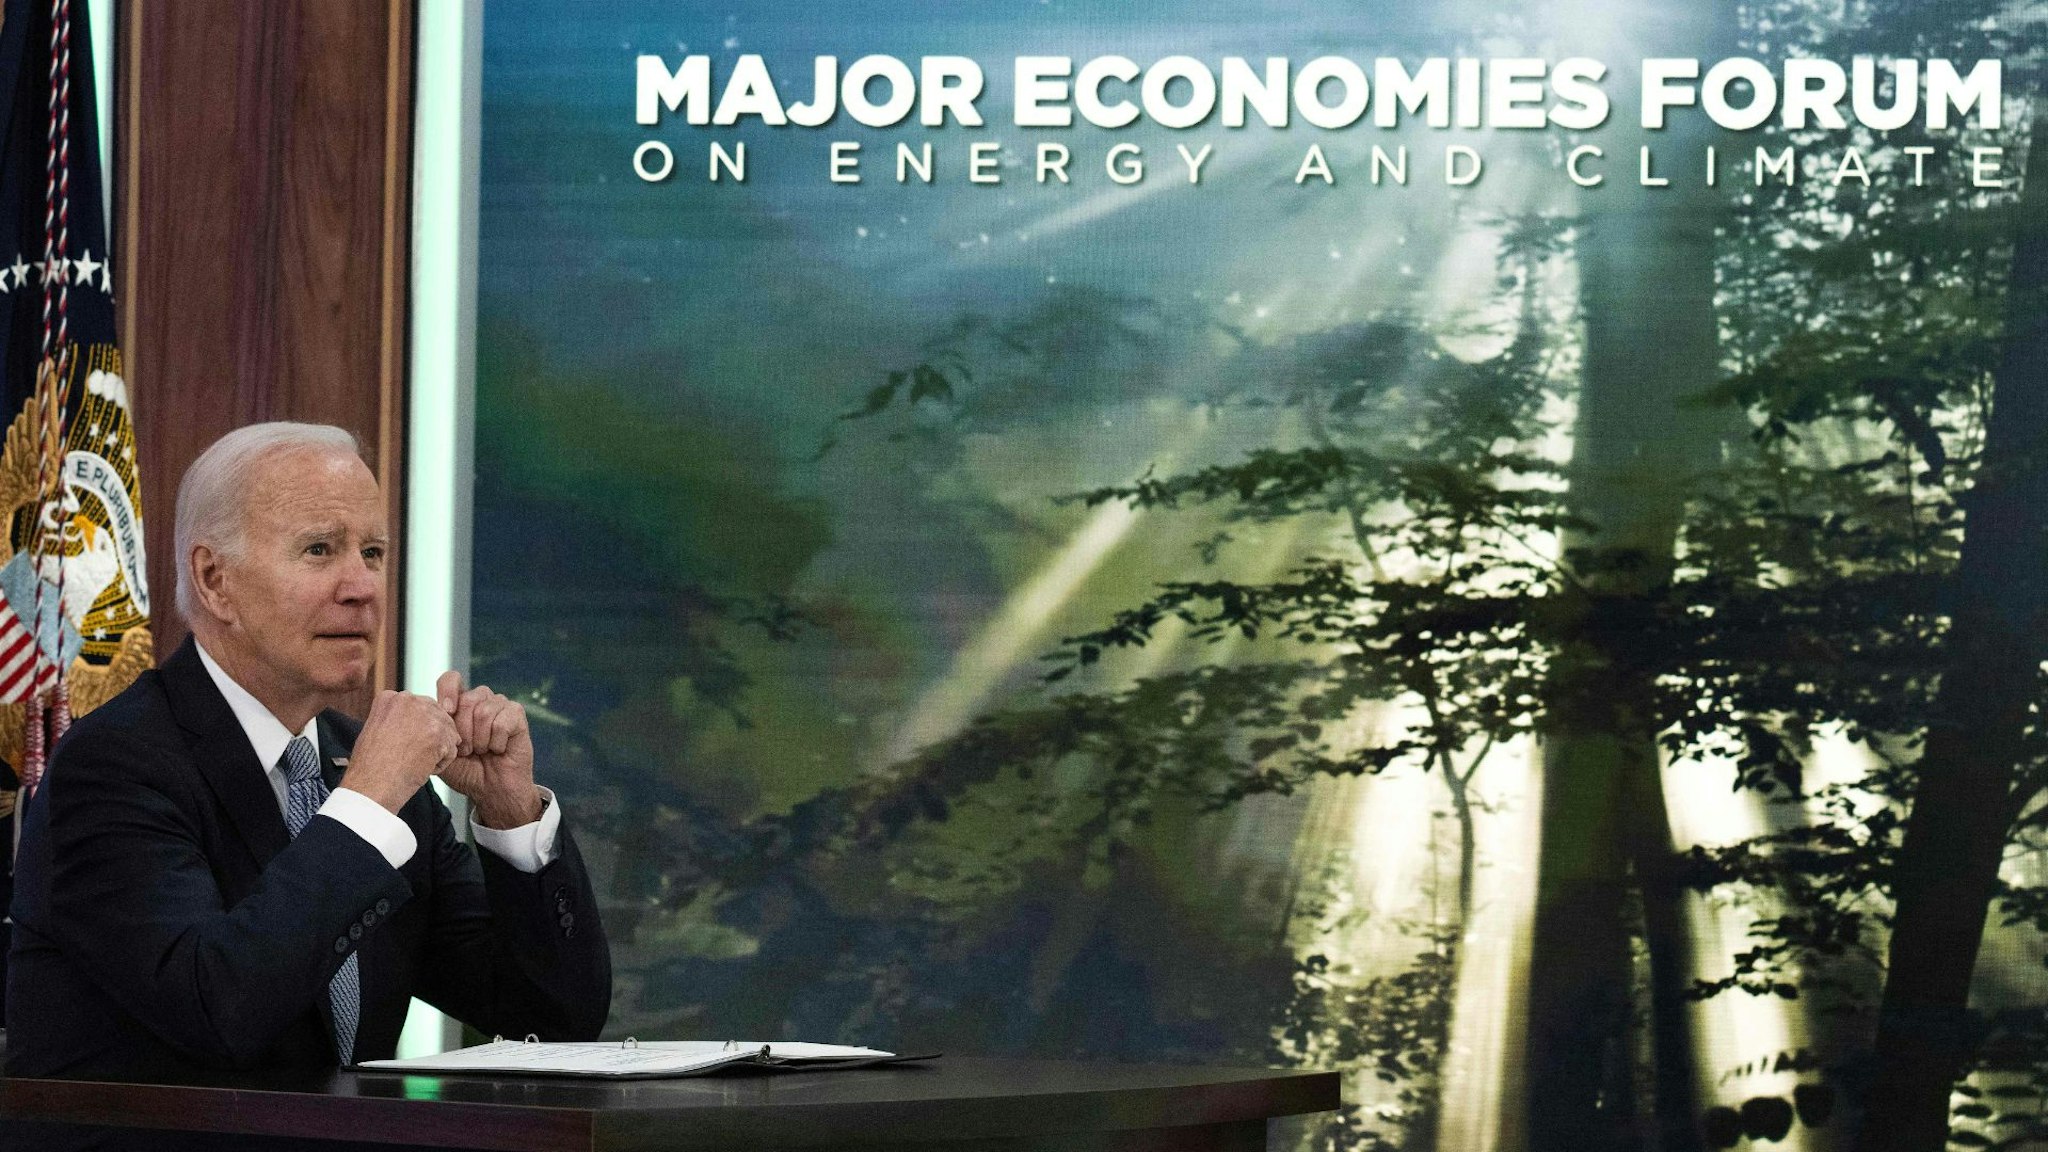 US President Joe Biden speaks during the fourth virtual leader-level meeting of the Major Economies Forum (MEF) on Energy and Climate in the South Court Auditorium next to the White House in Washington, DC, on April 20, 2023.